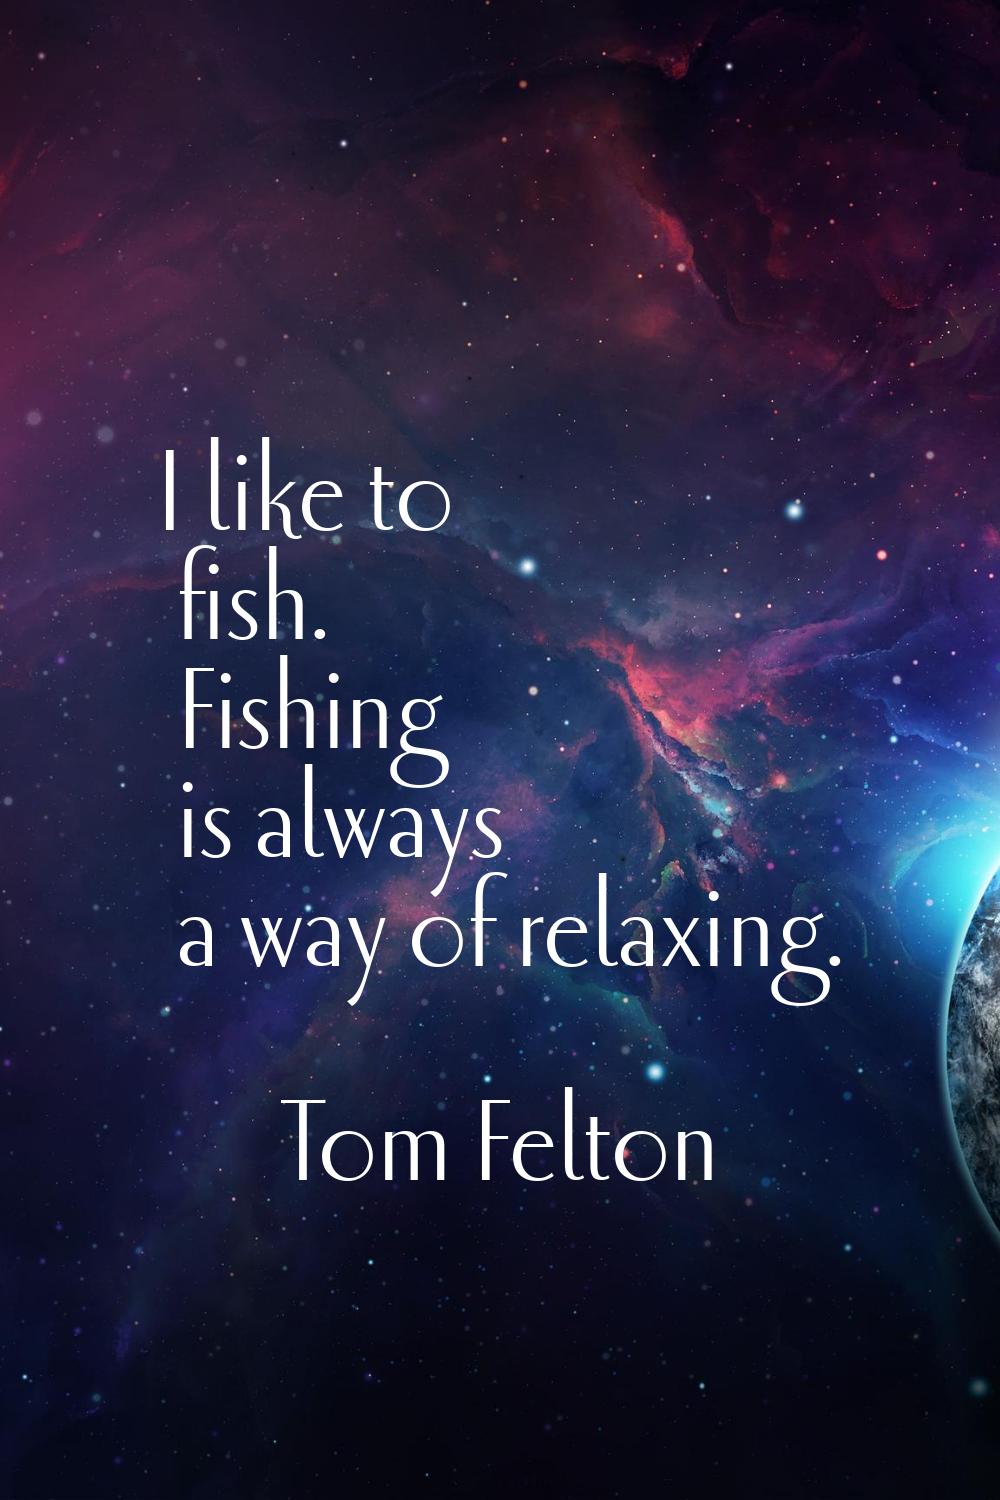 I like to fish. Fishing is always a way of relaxing.